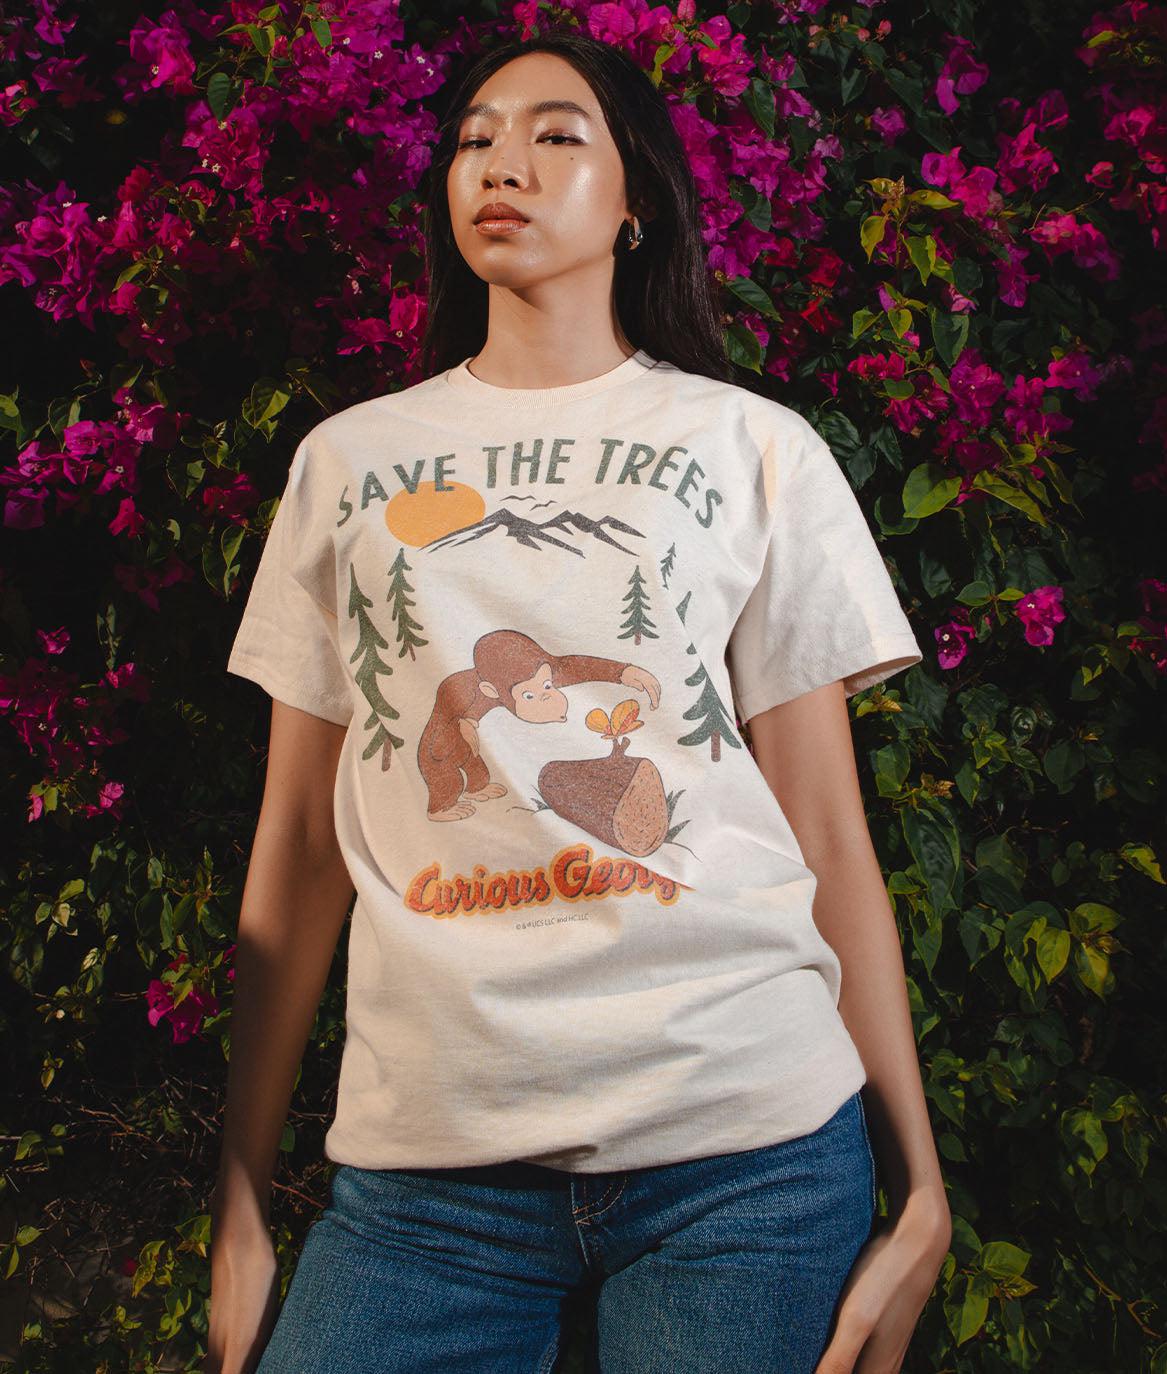 Curious George Save the Trees 2.0 Womens Tee - S - Riot Society